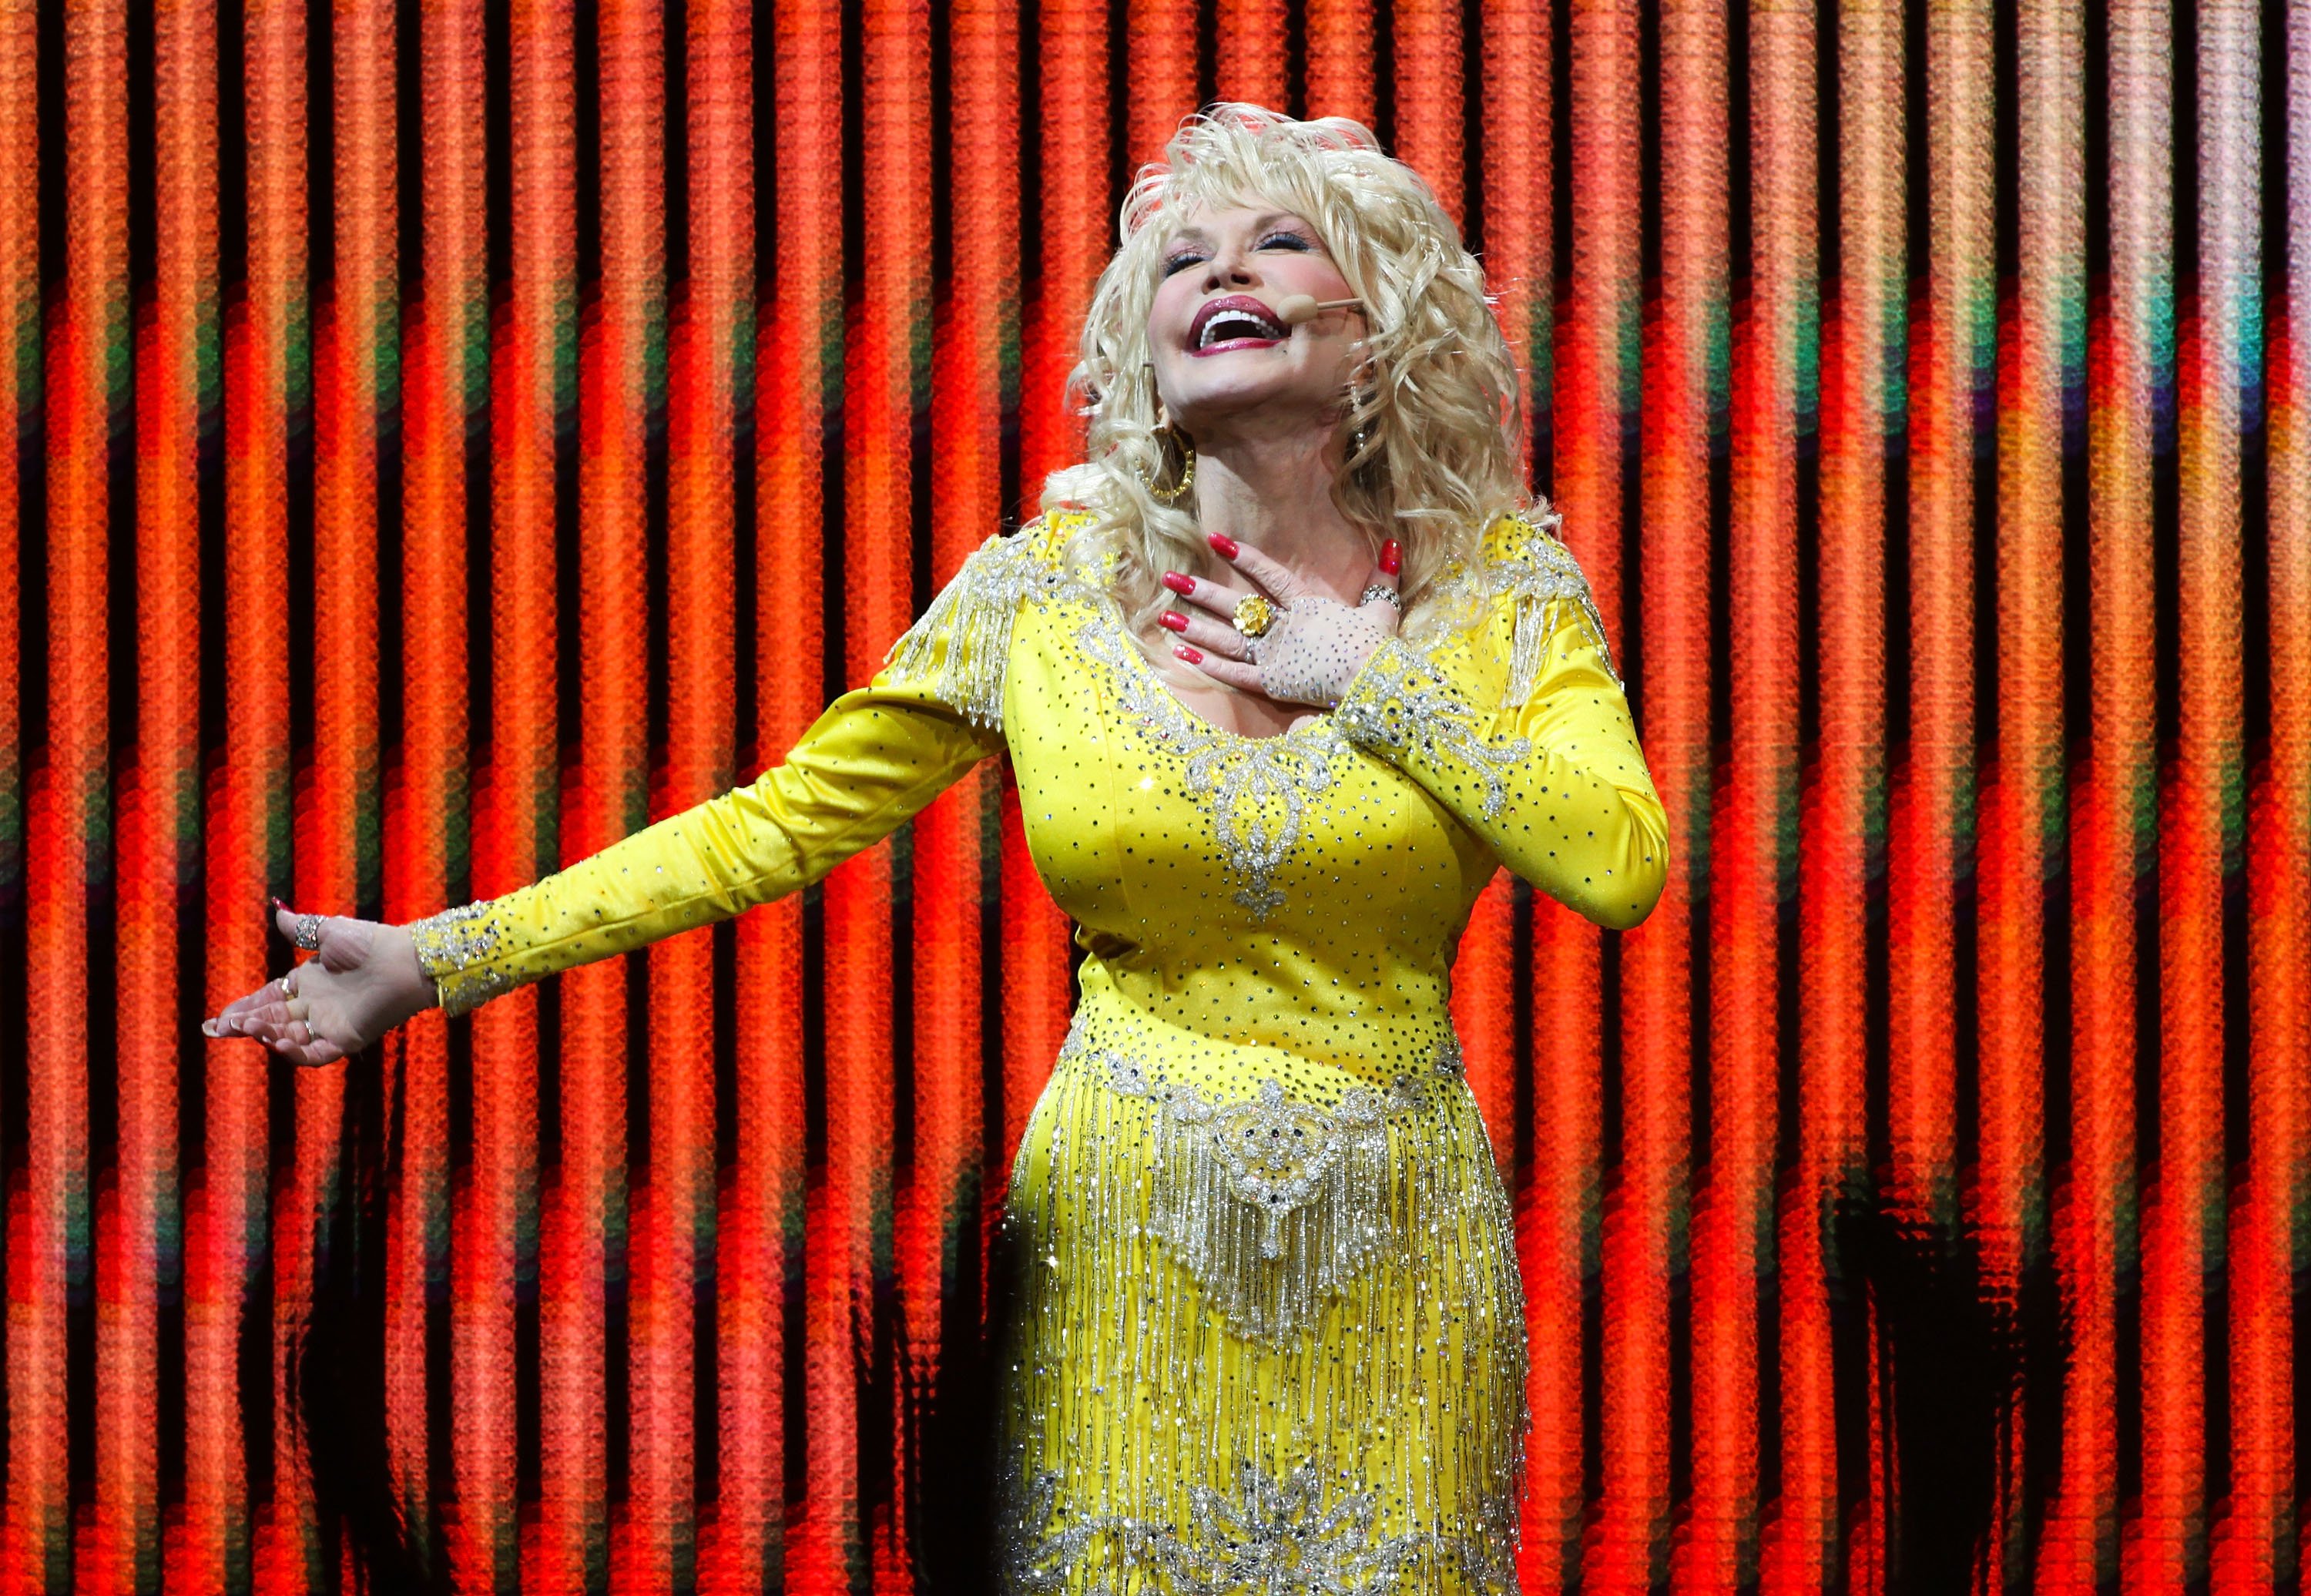 Dolly Parton singing in a yellow dress.